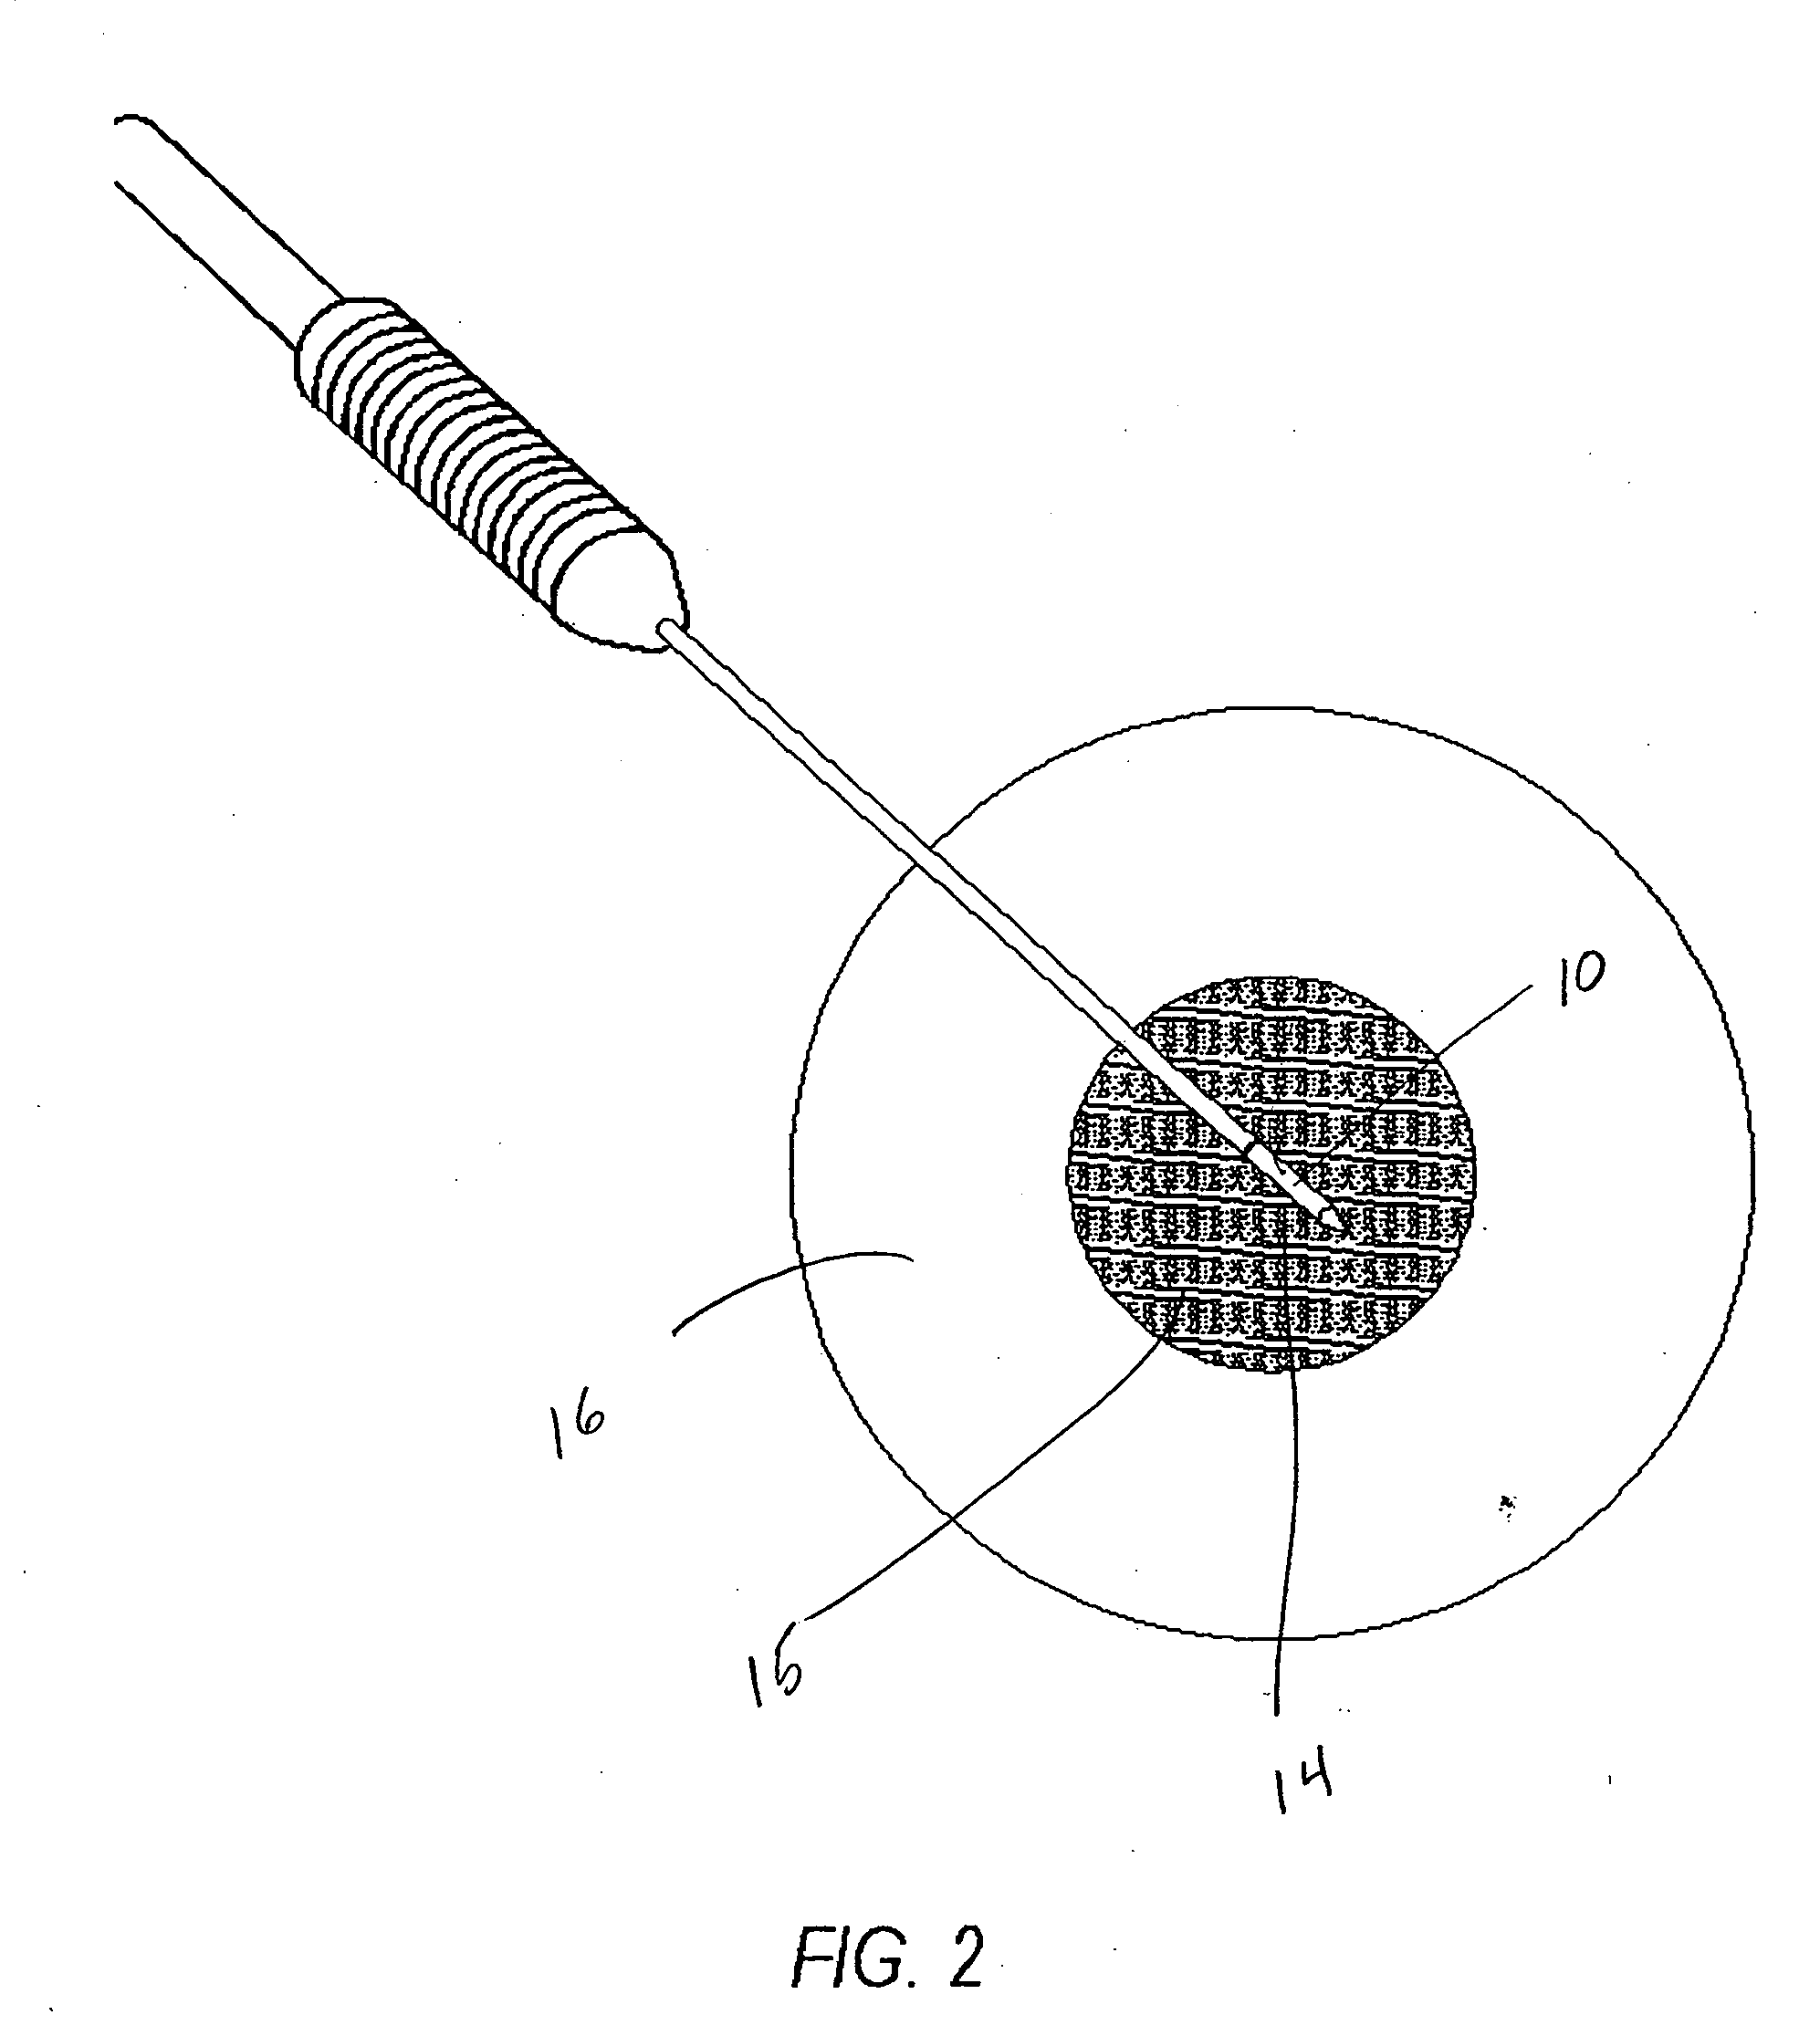 Cell necrosis apparatus with cooled microwave antenna